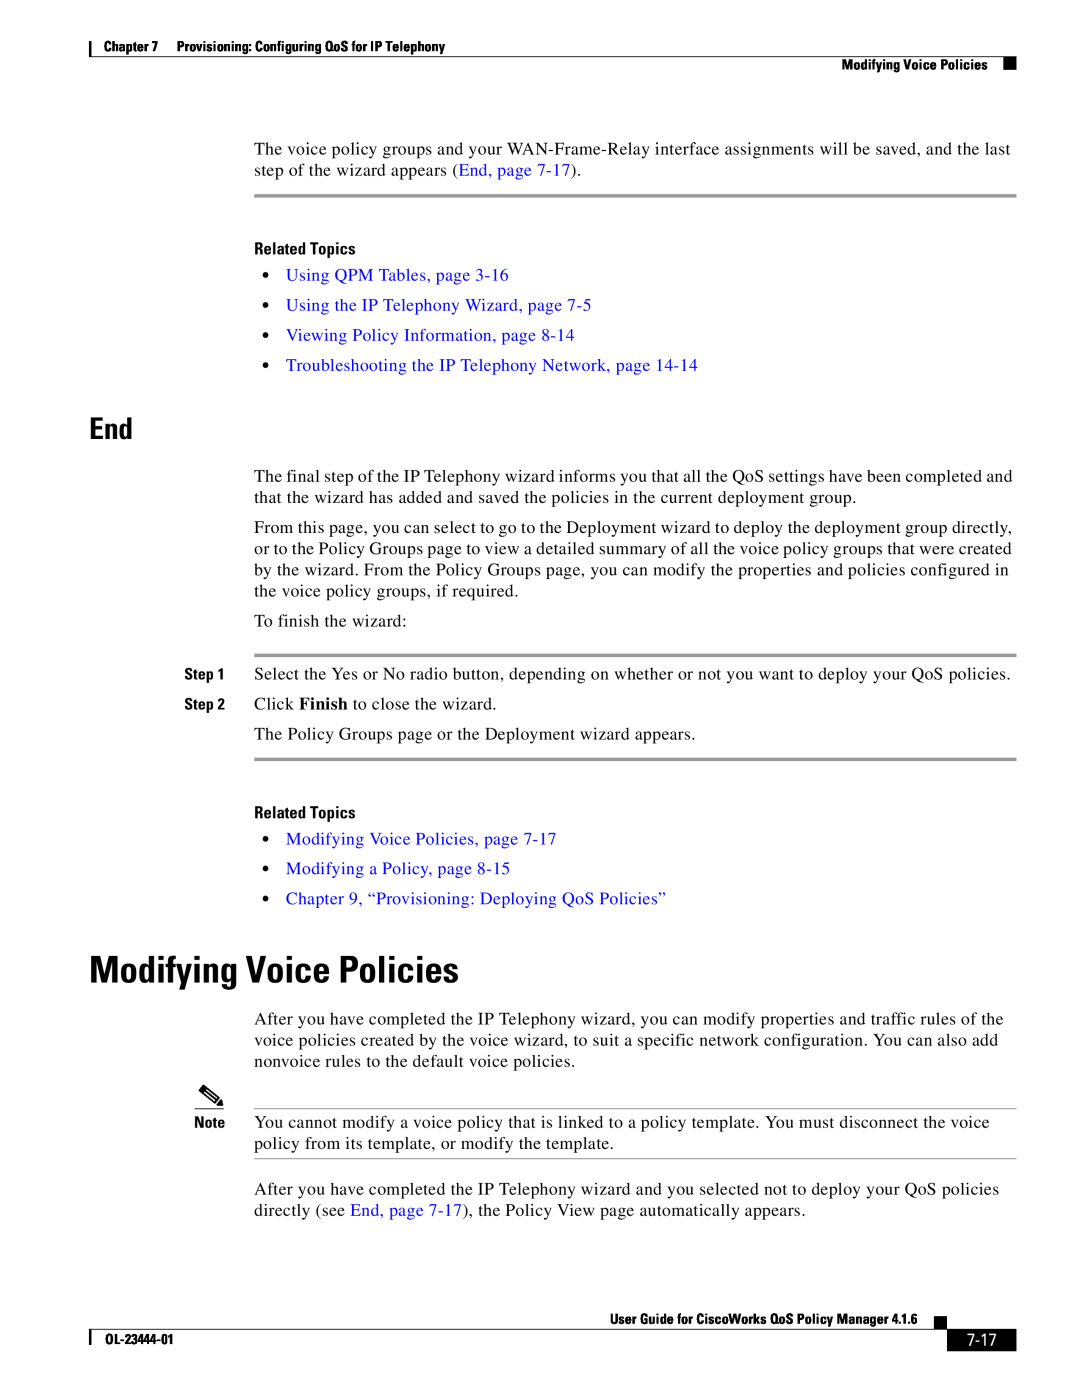 Cisco Systems 416 manual Modifying Voice Policies, page Modifying a Policy, page, 7-17, Related Topics 